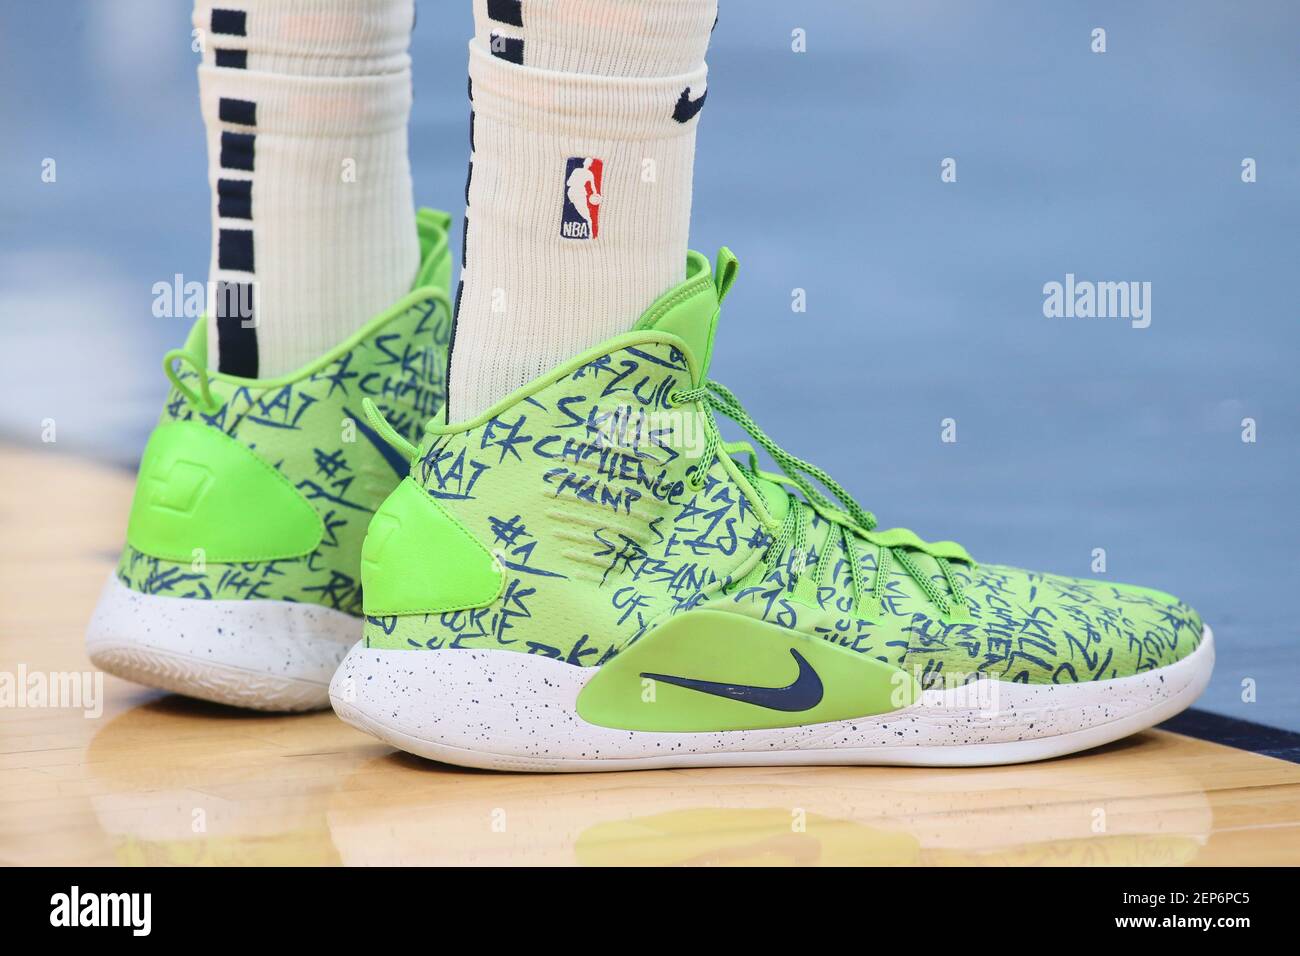 Nov 6, 2019; Memphis, TN, USA; Shoes worn by Minnesota Timberwolves center Karl  Anthony Towns during the game against the Memphis Grizzlies at FedExForum.  Memphis won 137-121. Mandatory Credit: Nelson Chenault-USA TODAY